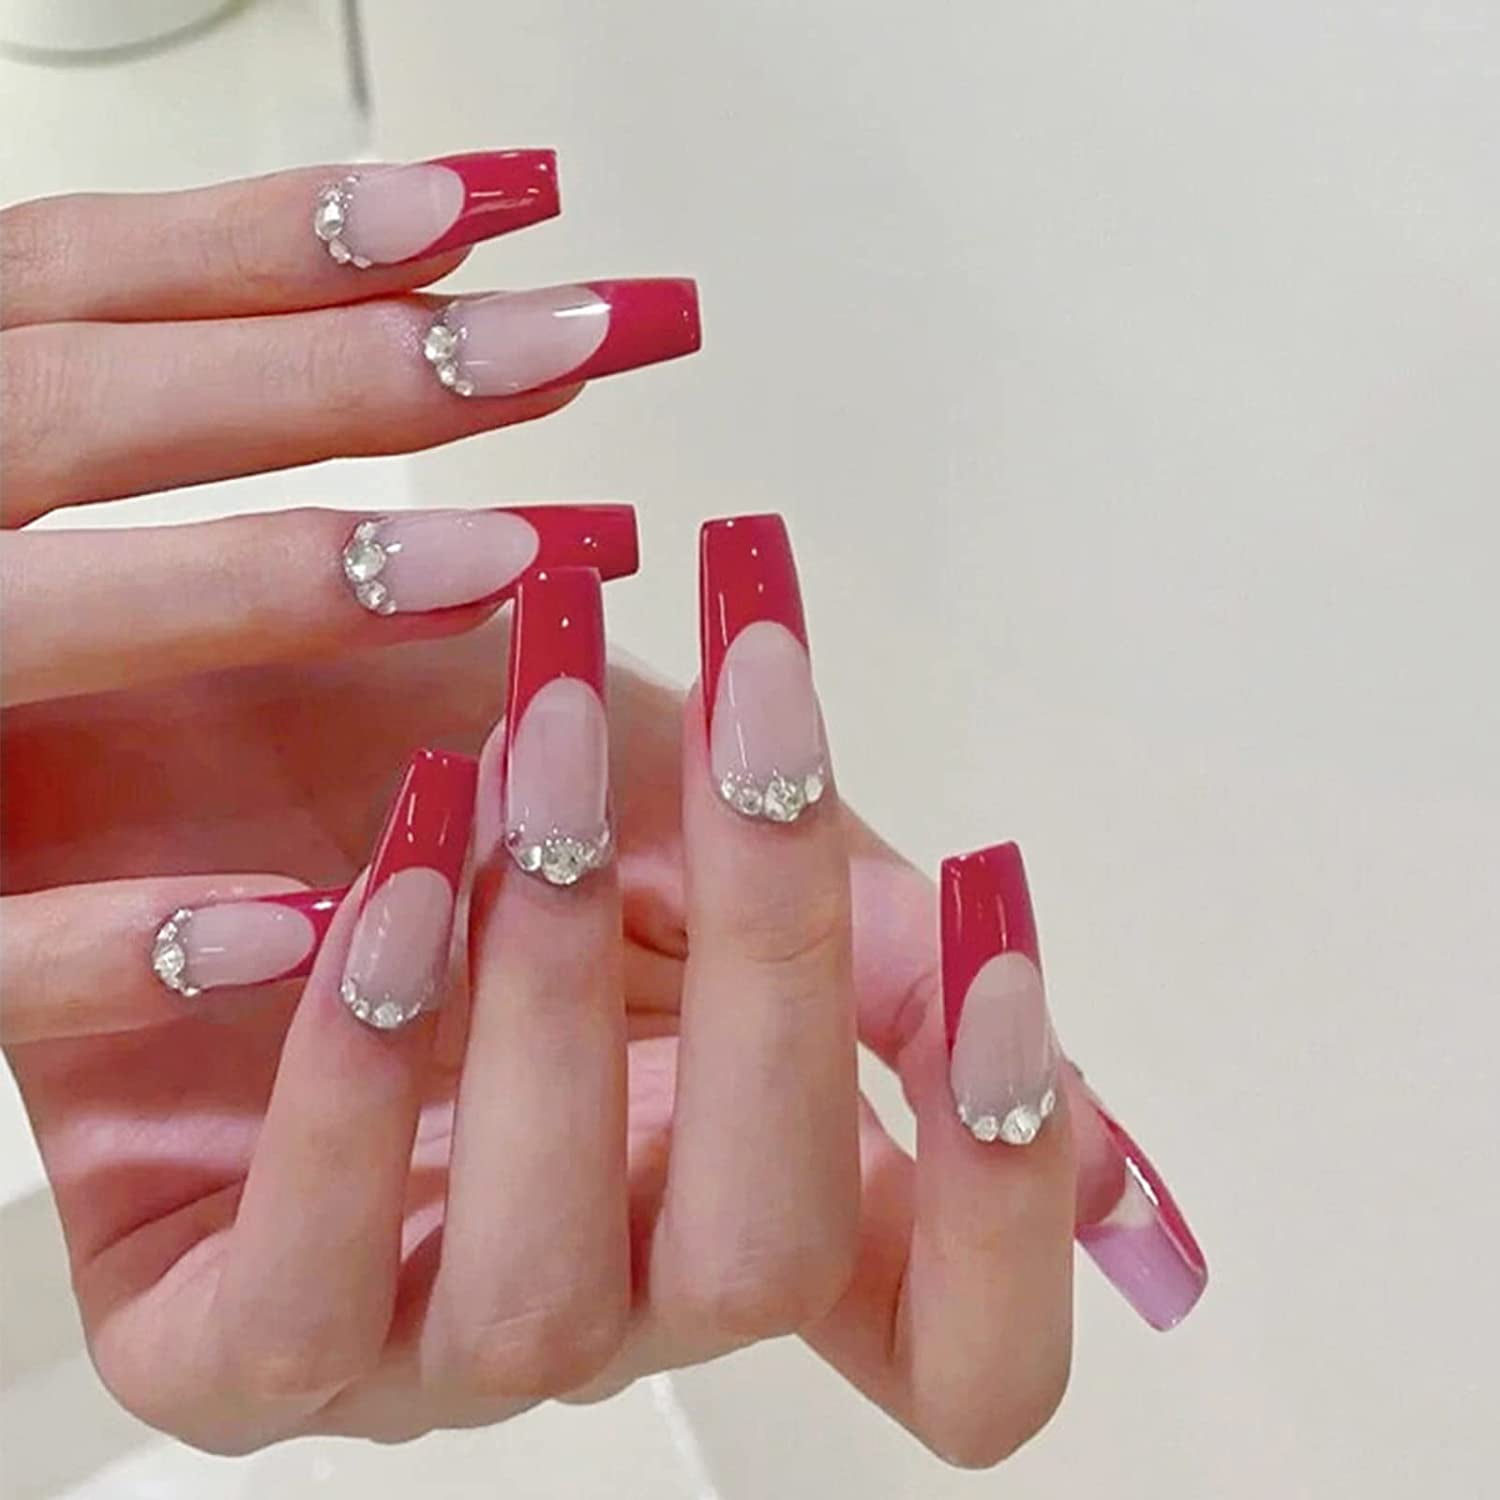 18 Red Nails Design Ideas for When You're Feeling Bold | Darcy